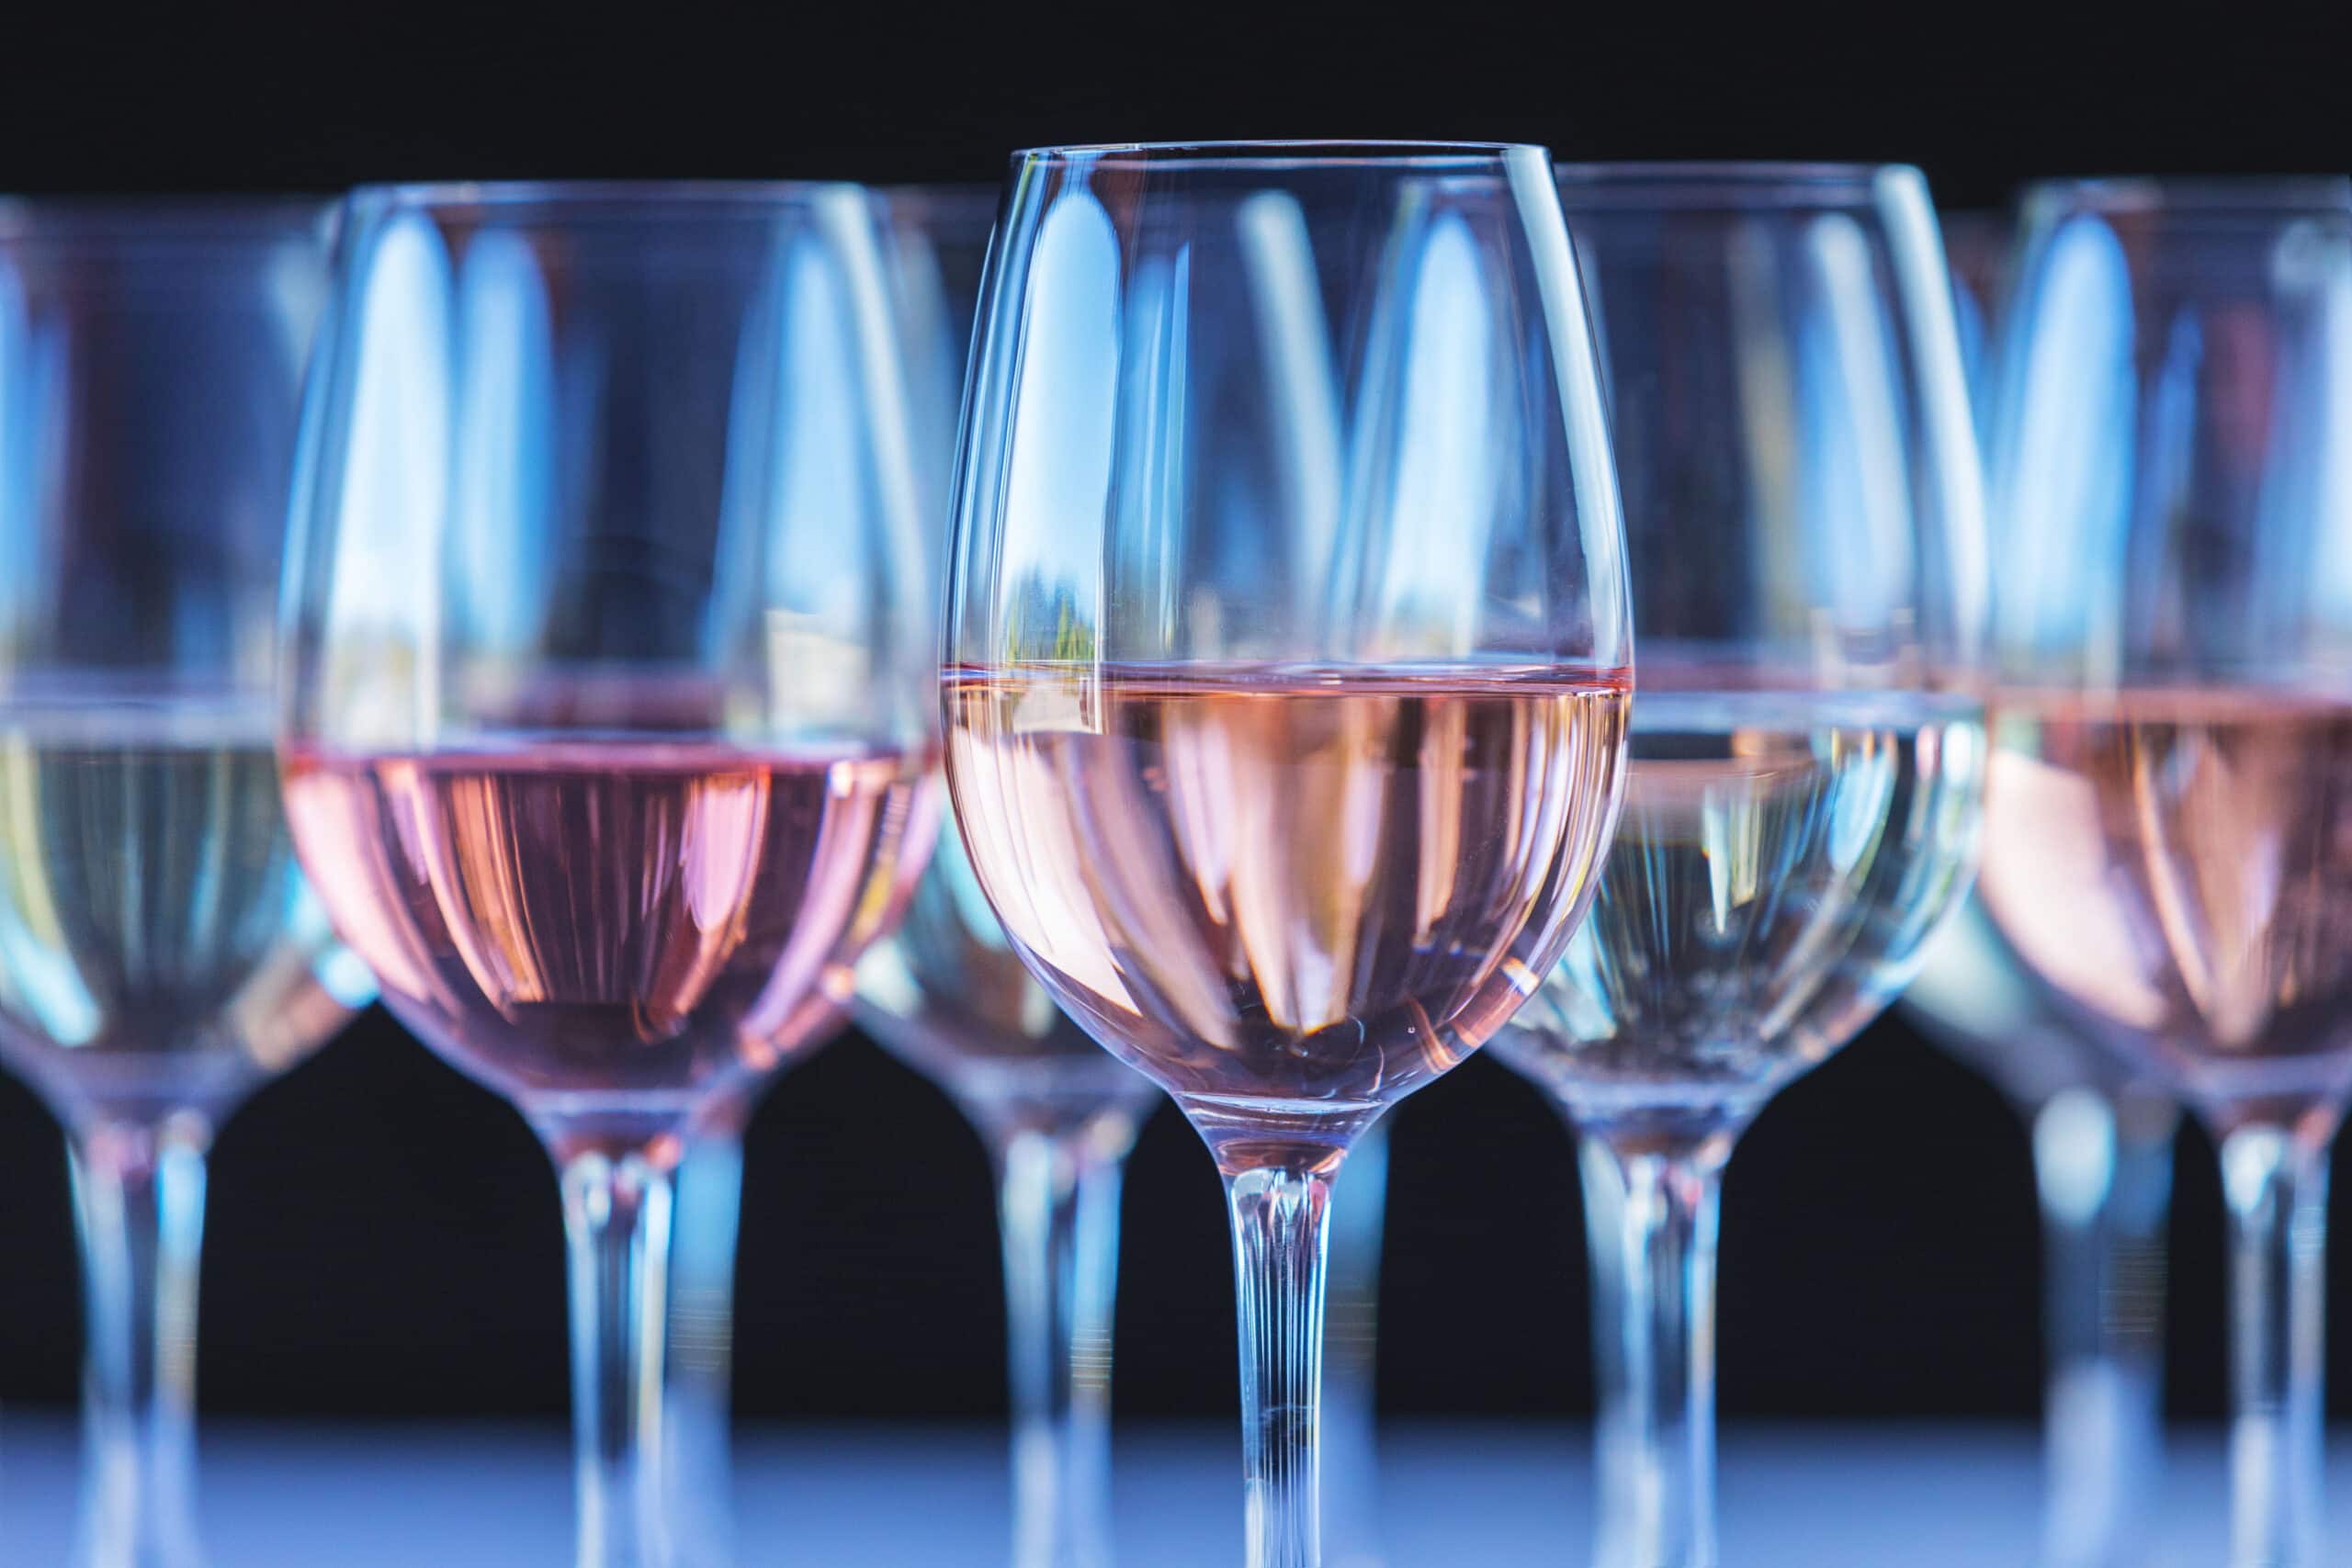 Pinking in white wine: When colours go awry